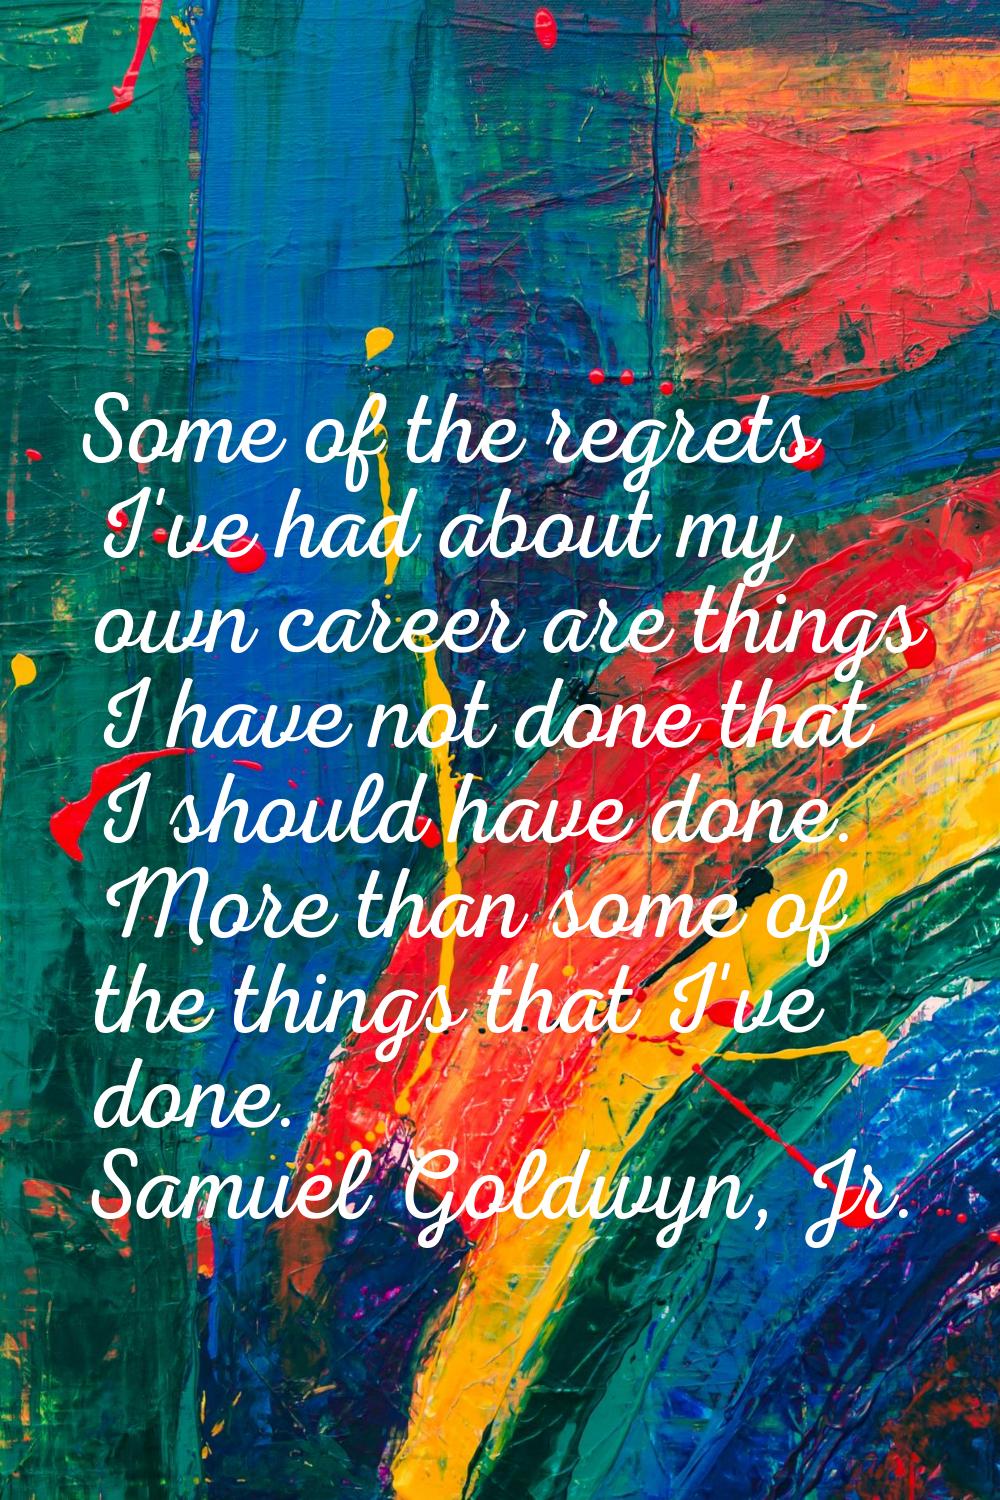 Some of the regrets I've had about my own career are things I have not done that I should have done